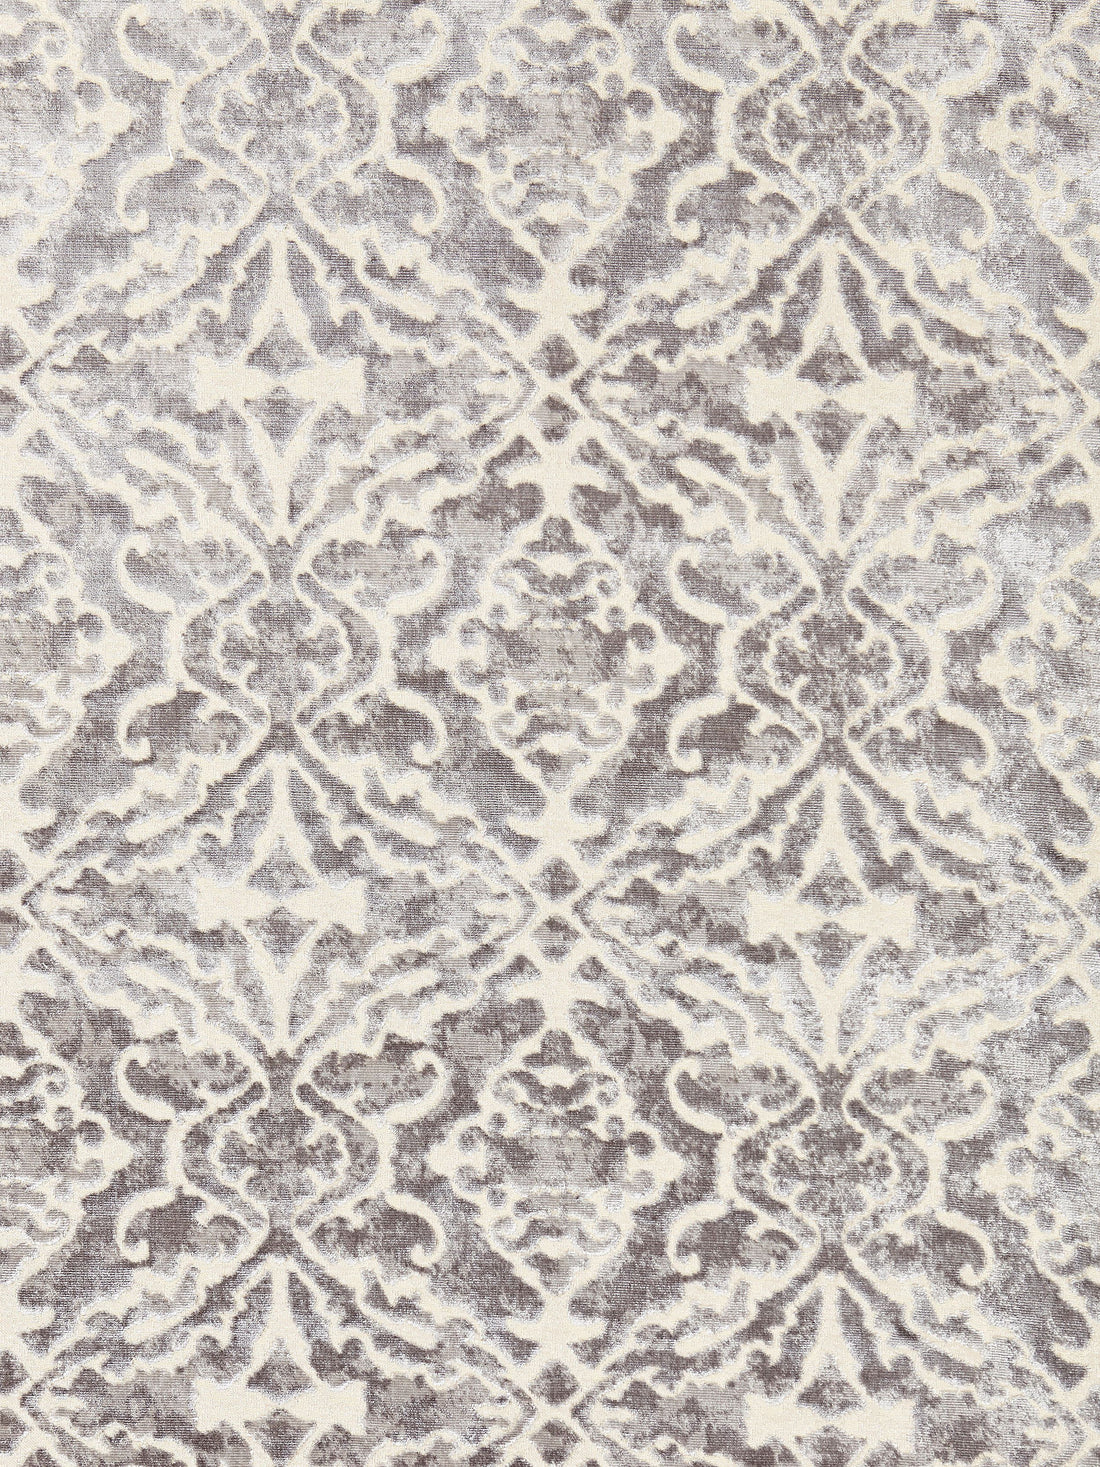 Palazzo Velvet fabric in nickel color - pattern number SC 000227084 - by Scalamandre in the Scalamandre Fabrics Book 1 collection